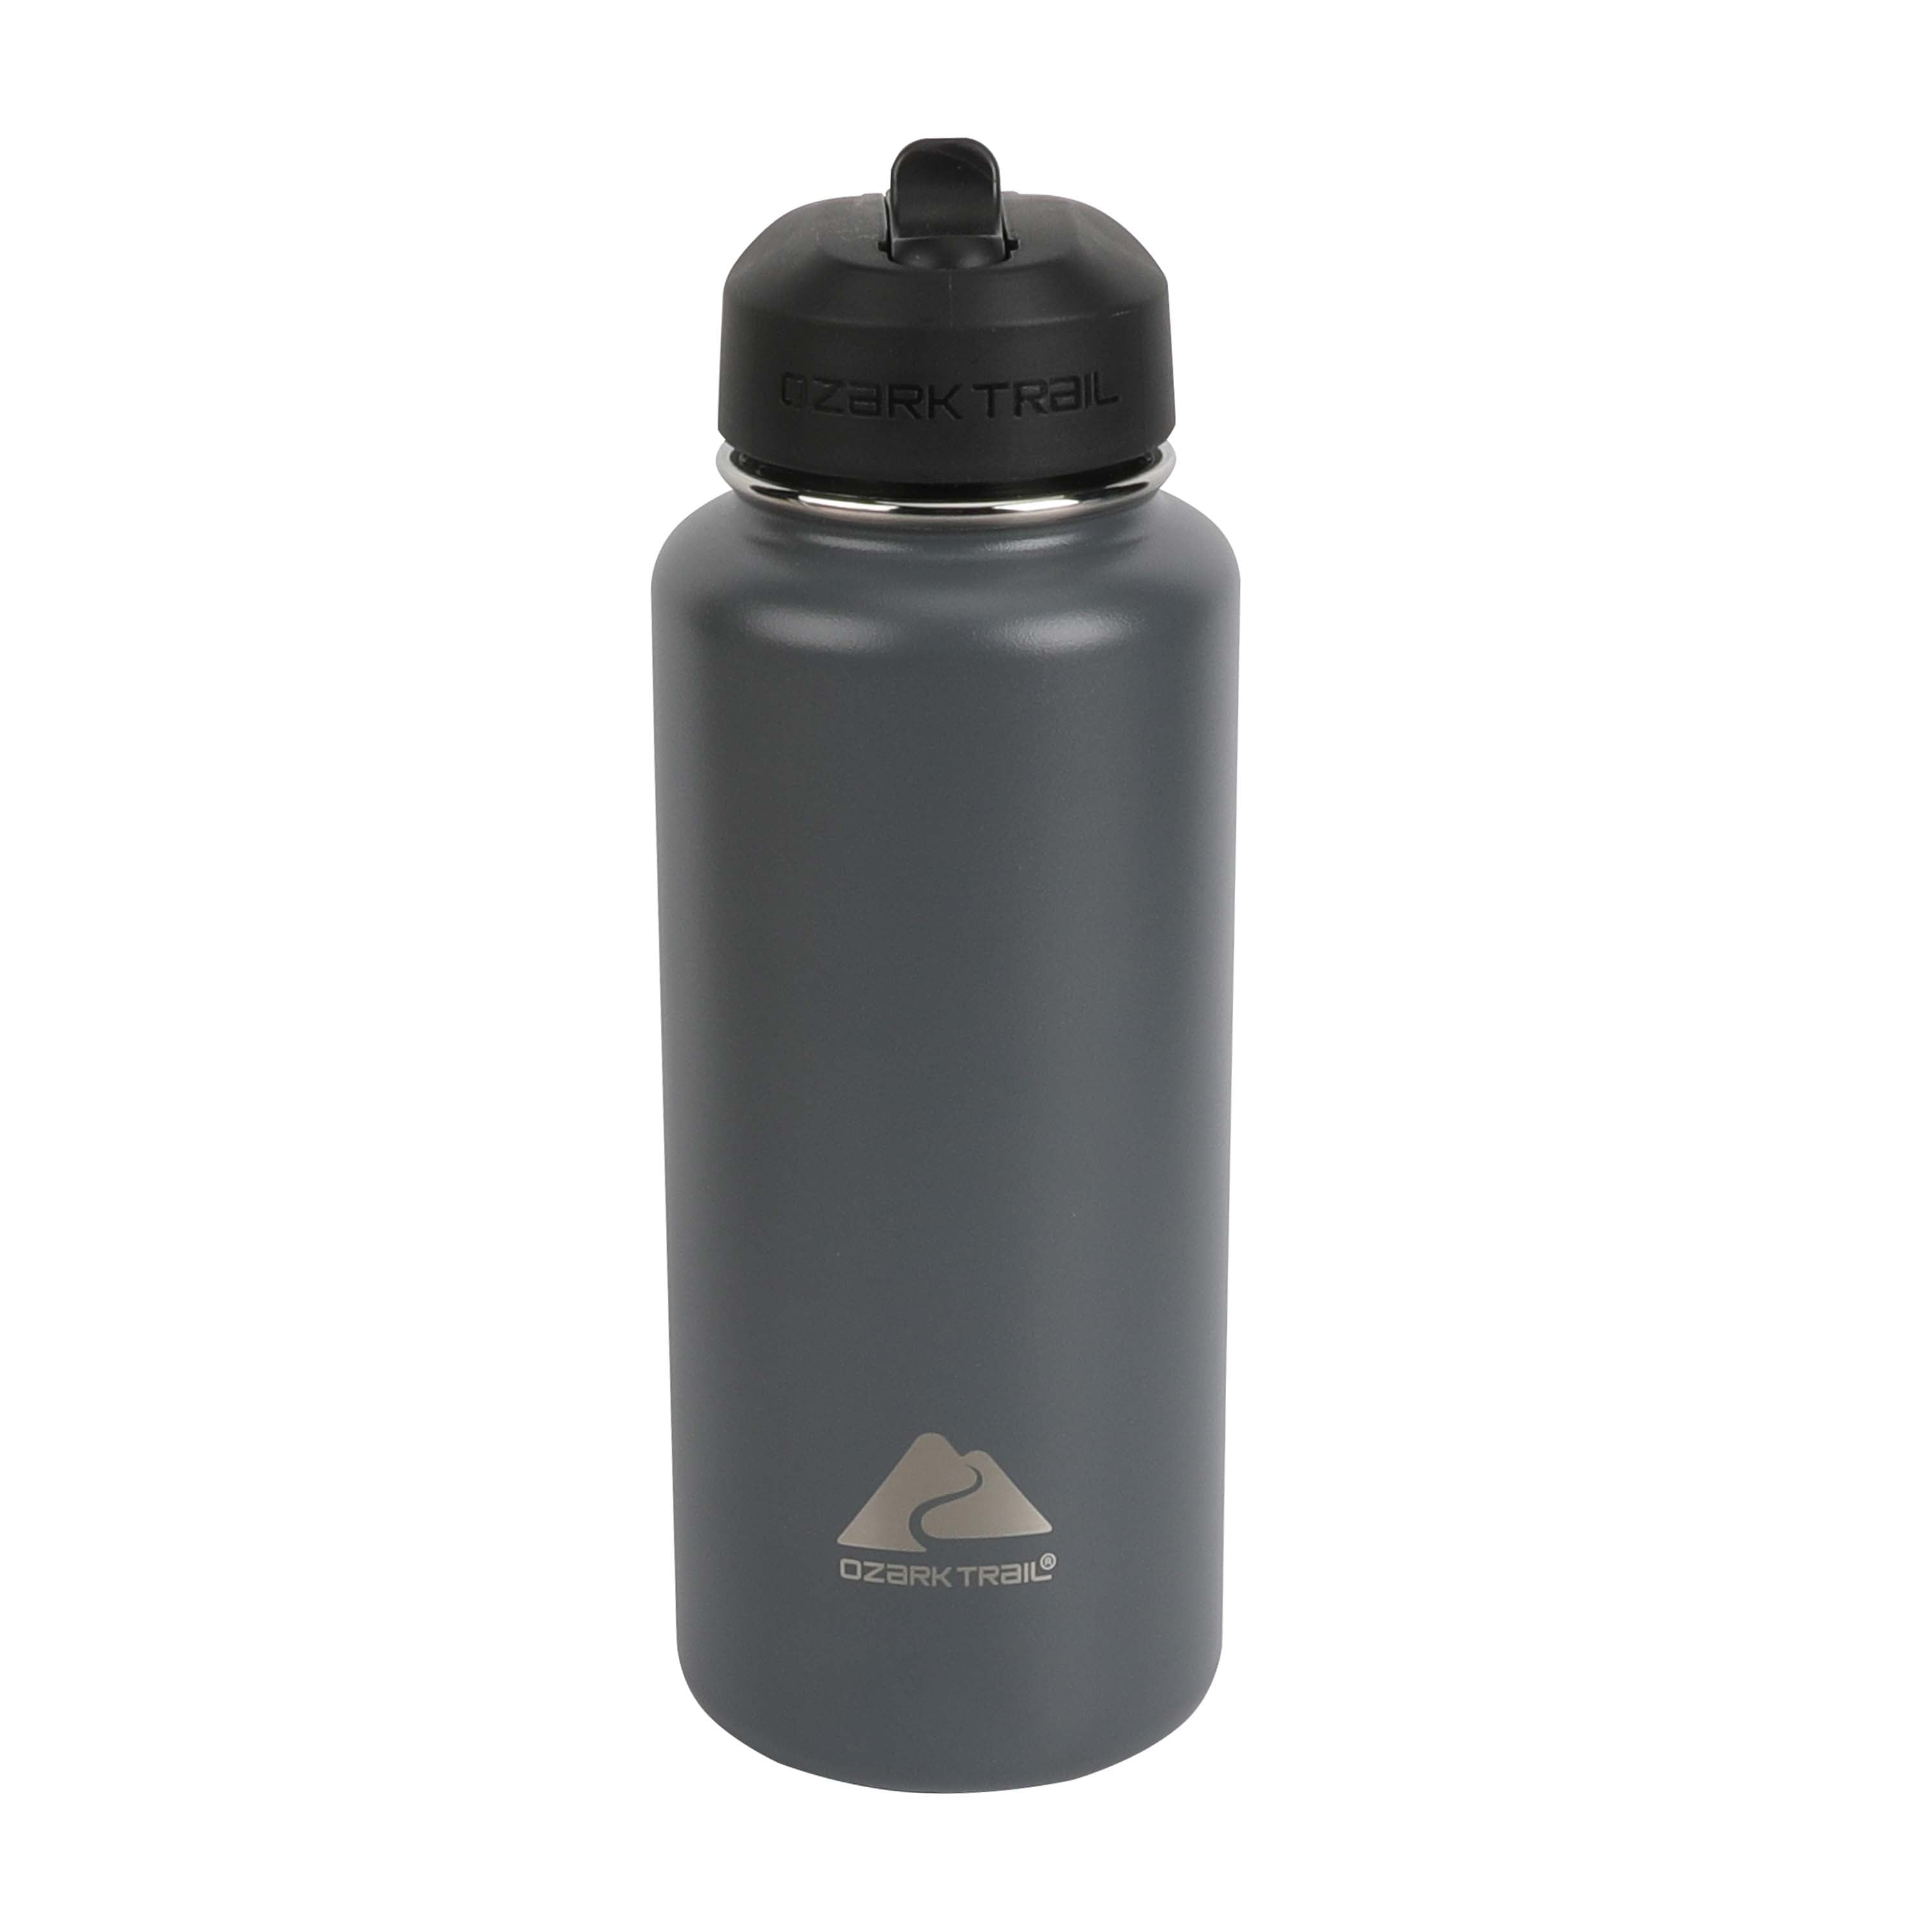 Hydrapeak 40oz Wide Mouth Stainless Steel Water Bottle with Chug Lid Cloud